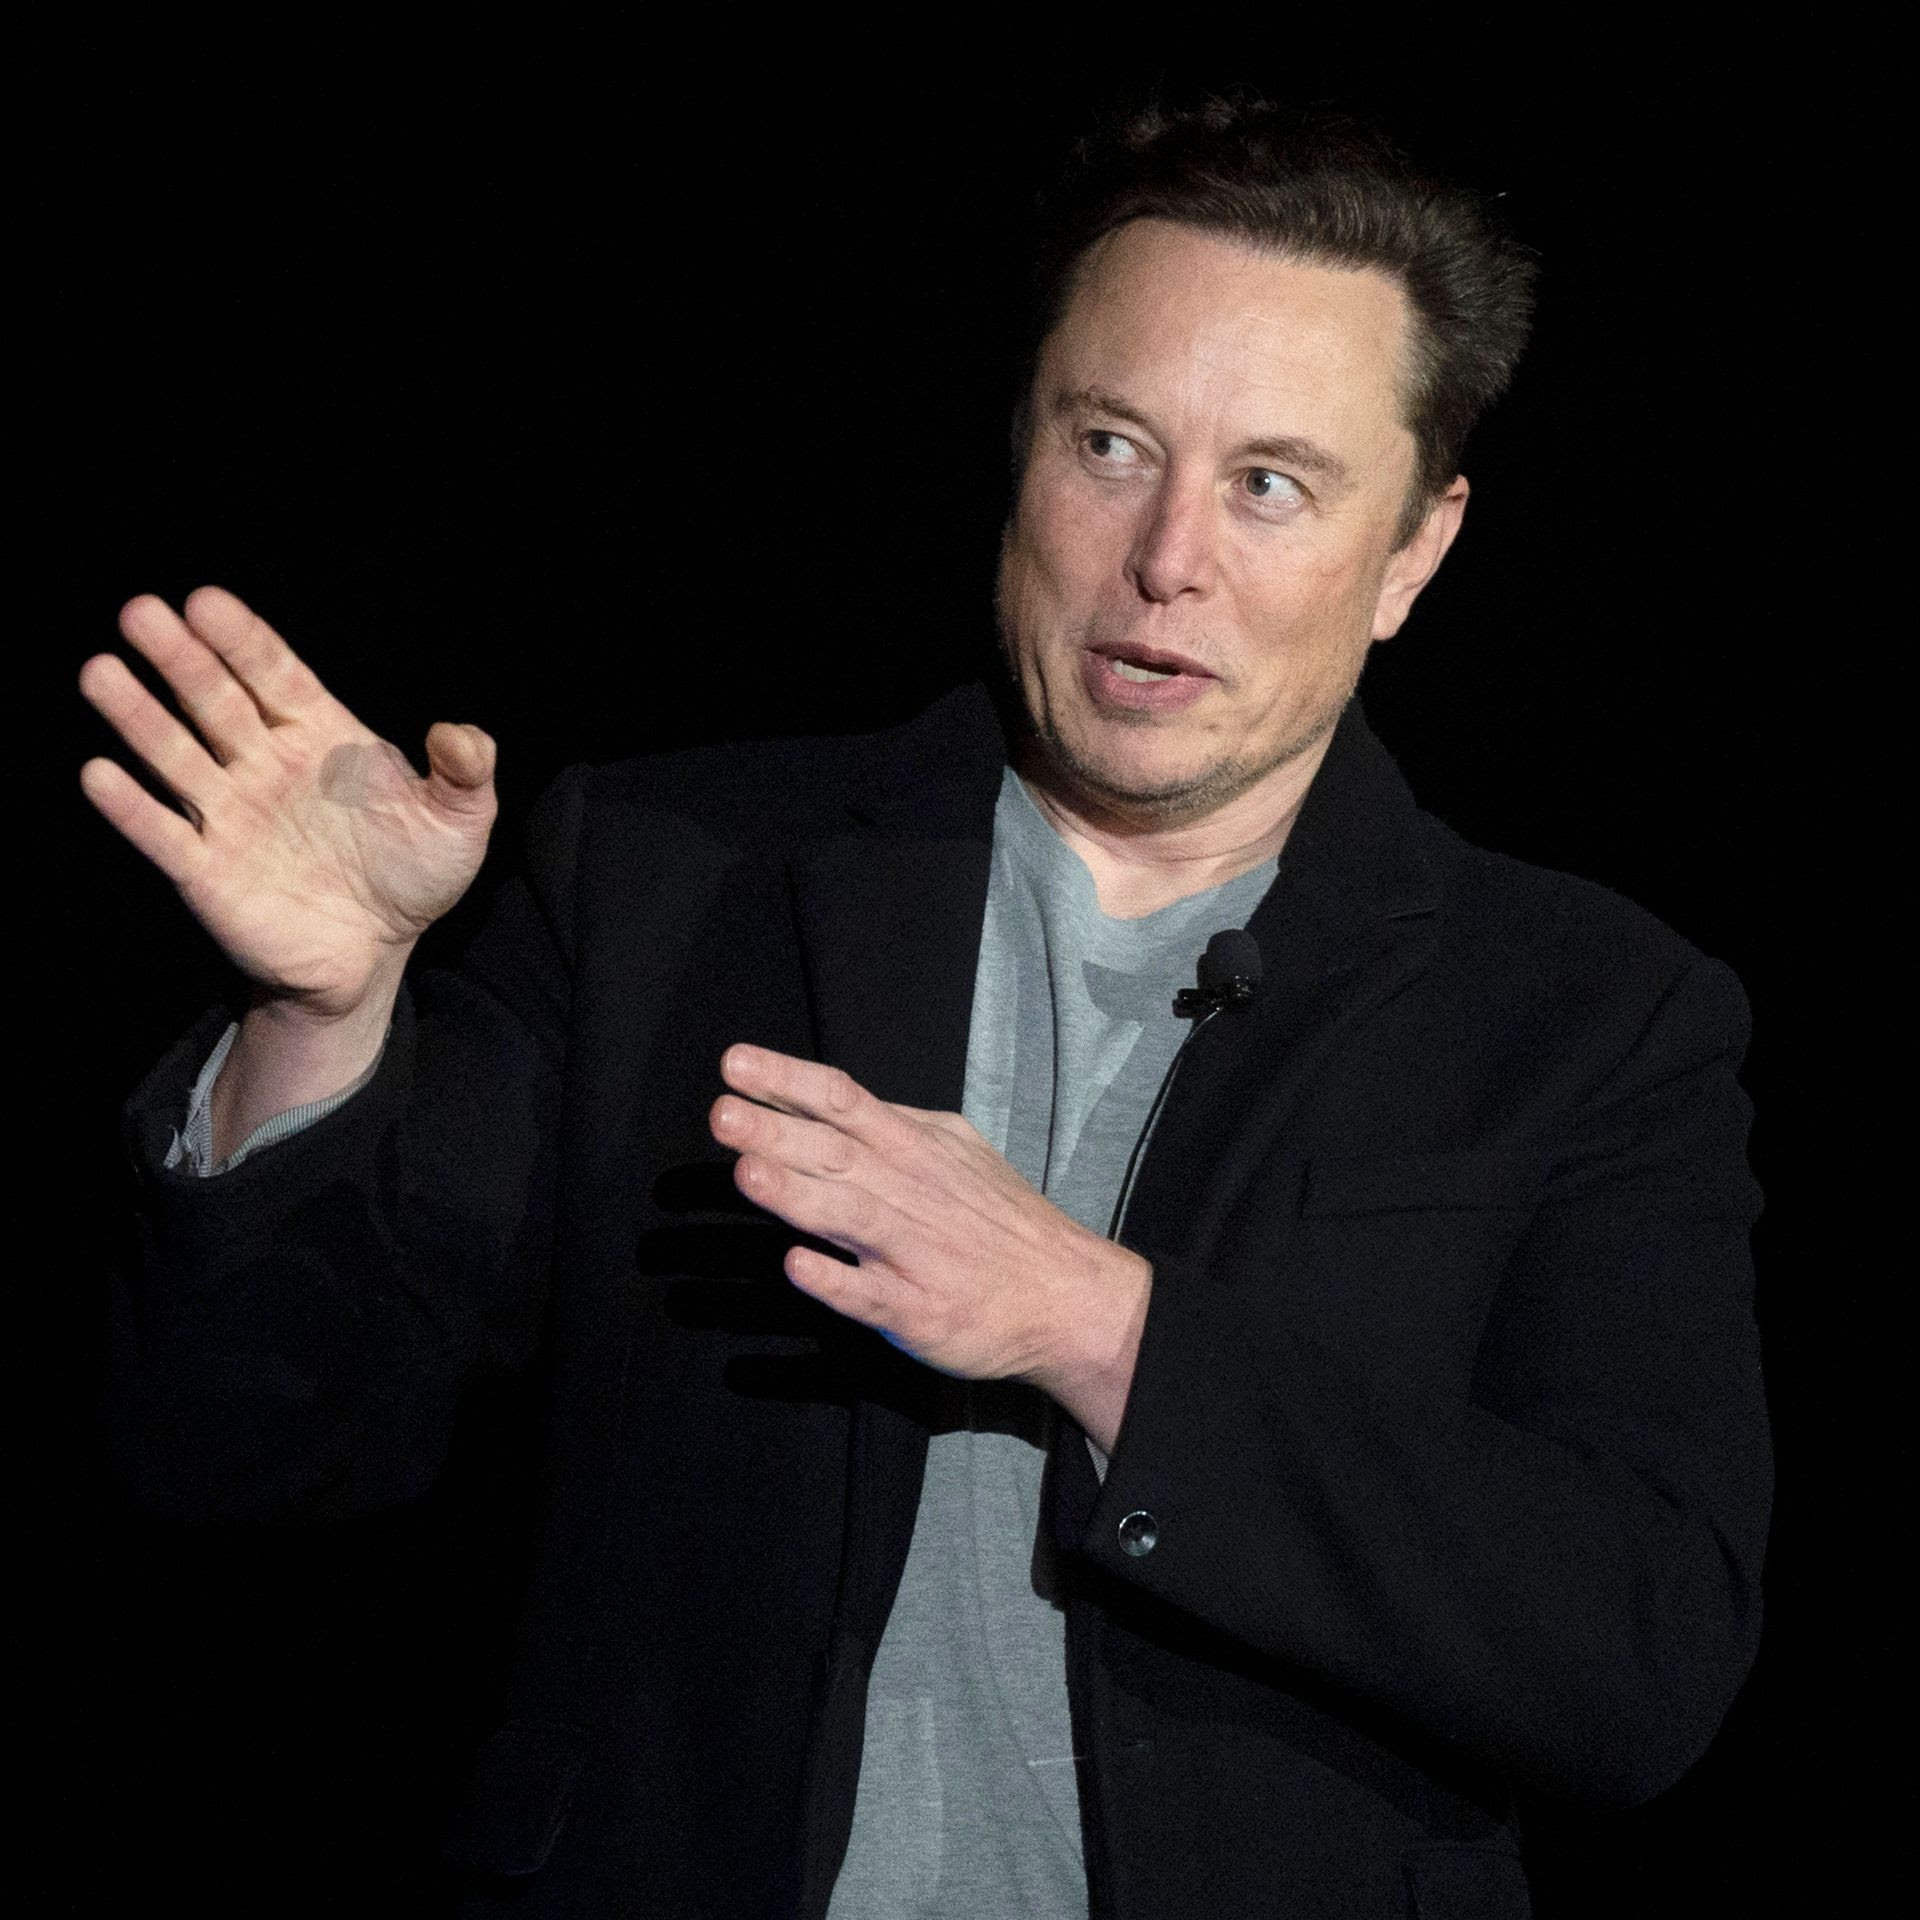 Musk's Twitter "amnesty" plan for suspended accounts alarms activists